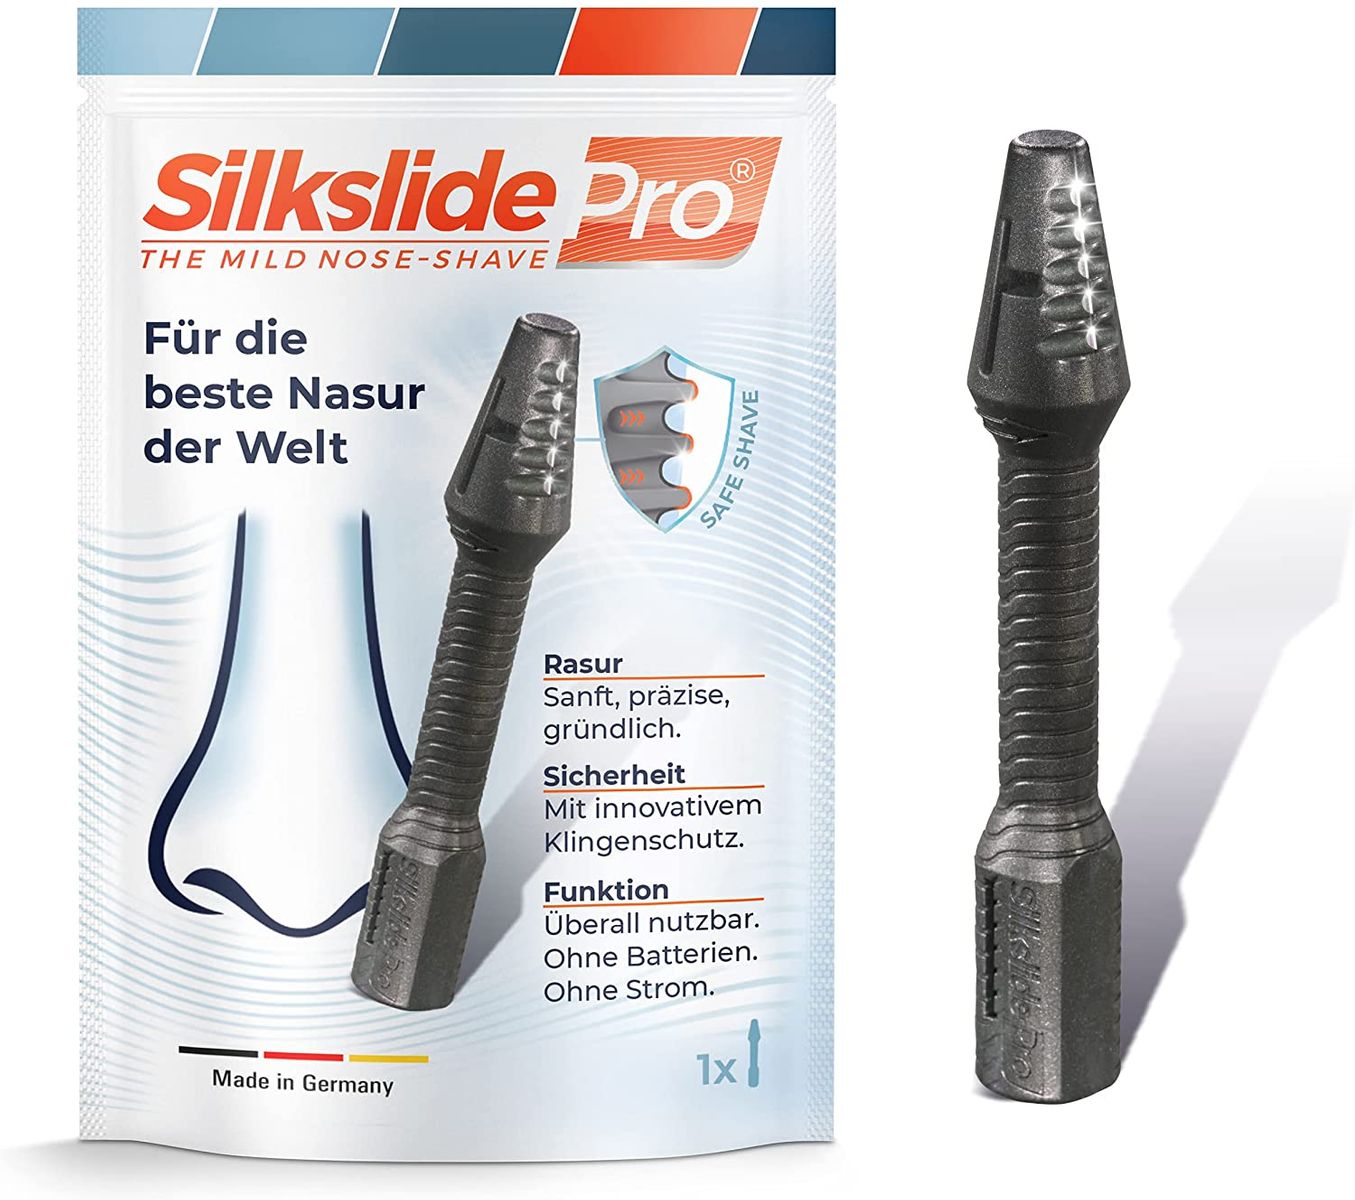 Silkslide Pro Nose Hair Trimmer Men - Innovative, professional & painless nose hair trimmer for the best nose shave